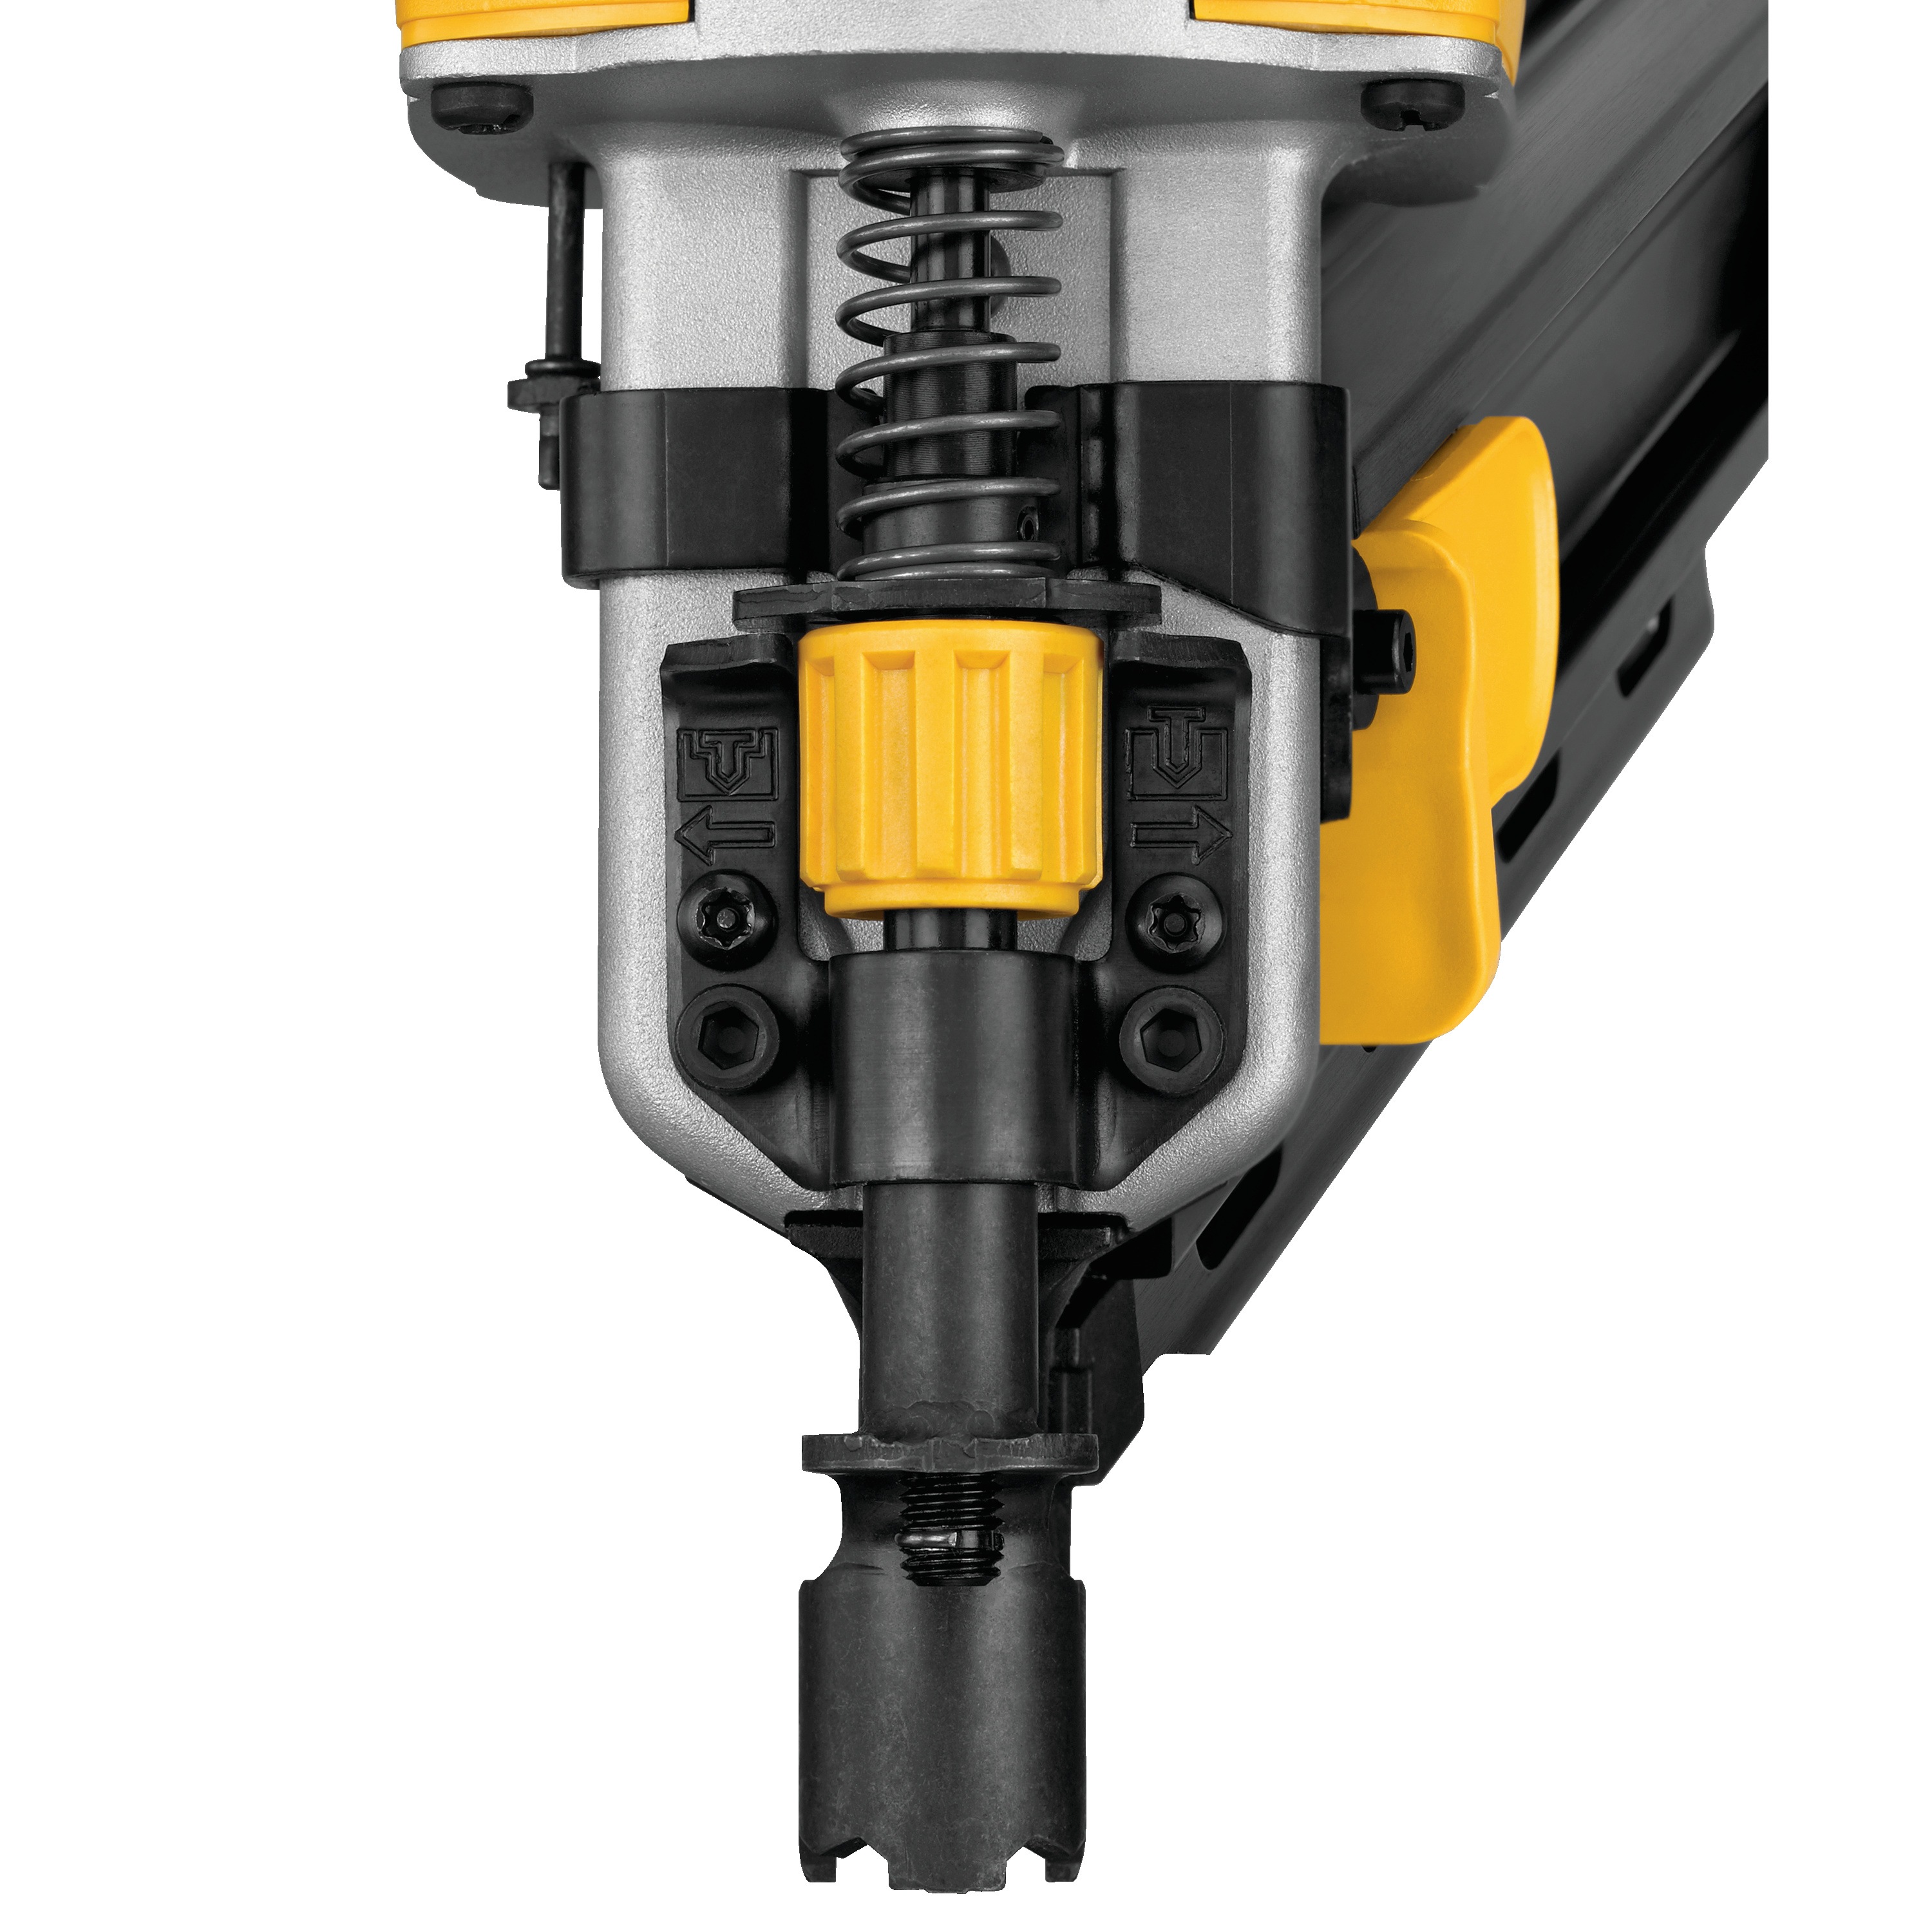 Close up of nose piece features of a 21 inch Plastic Collated Cordless Nailer